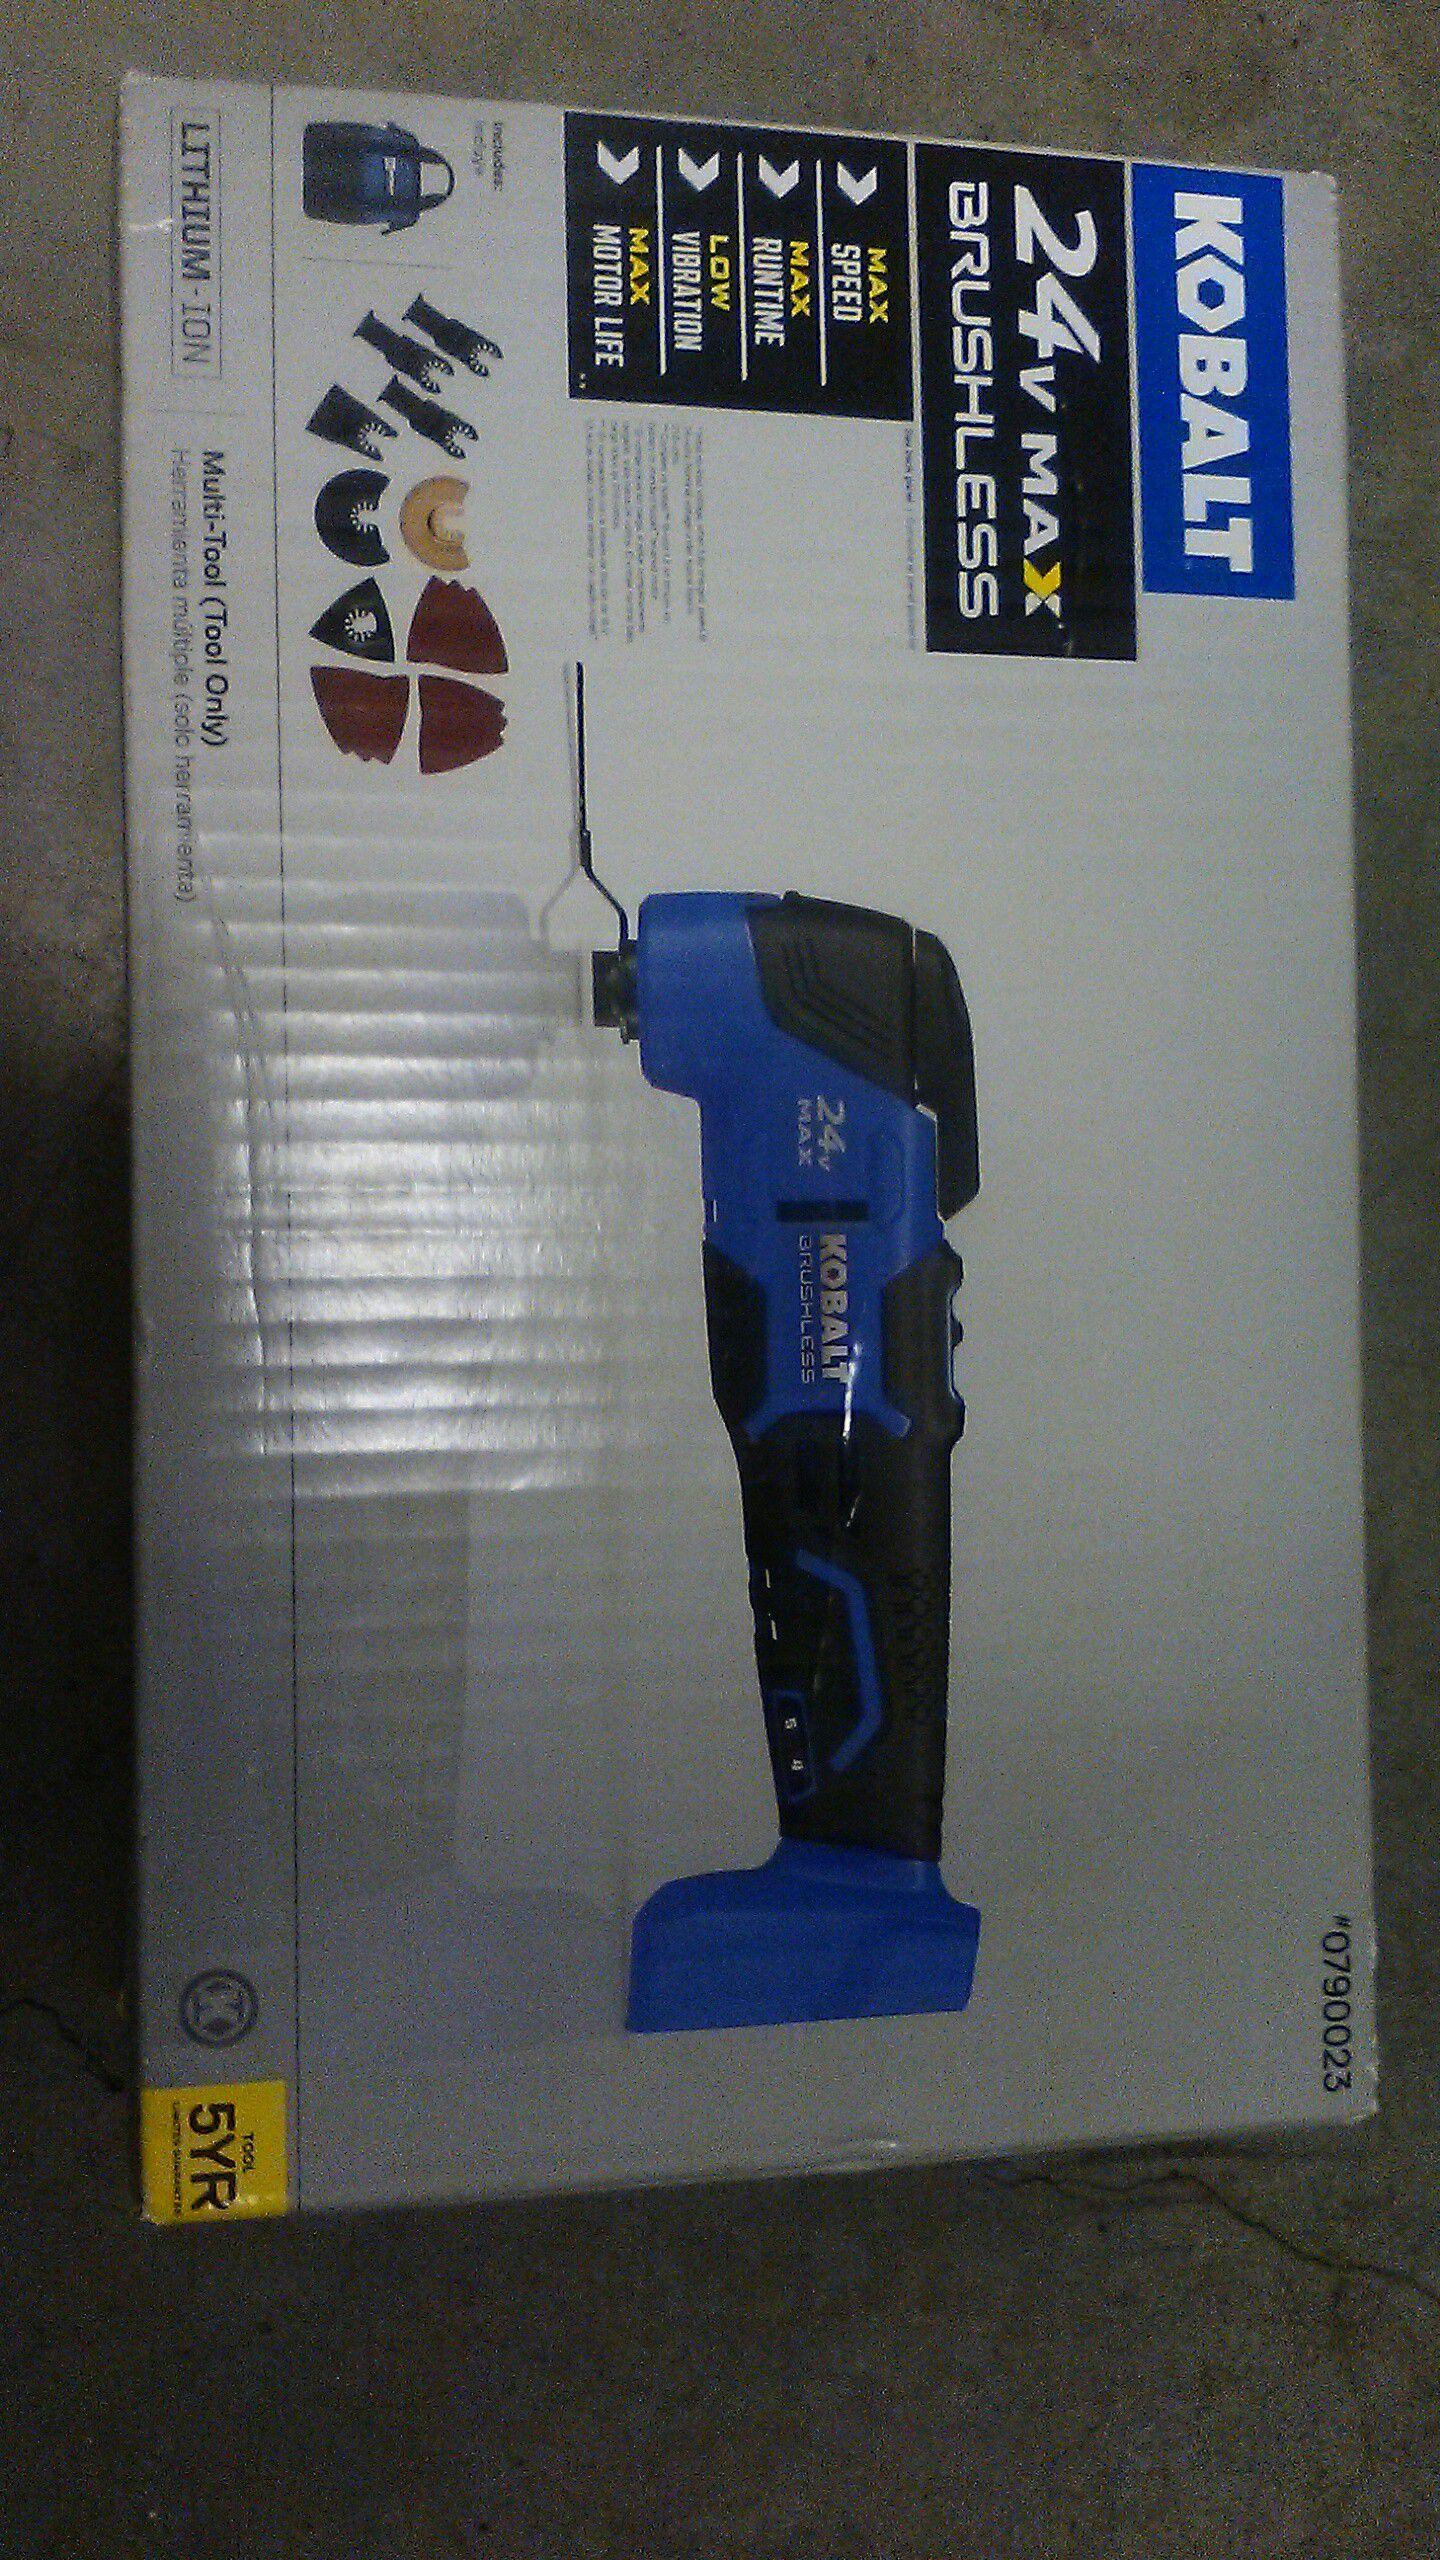 BRAND NEW Kobalt 18-Piece Cordless 24-Volt Max Oscillating Tool Kit *** for  Sale in Tacoma, WA OfferUp